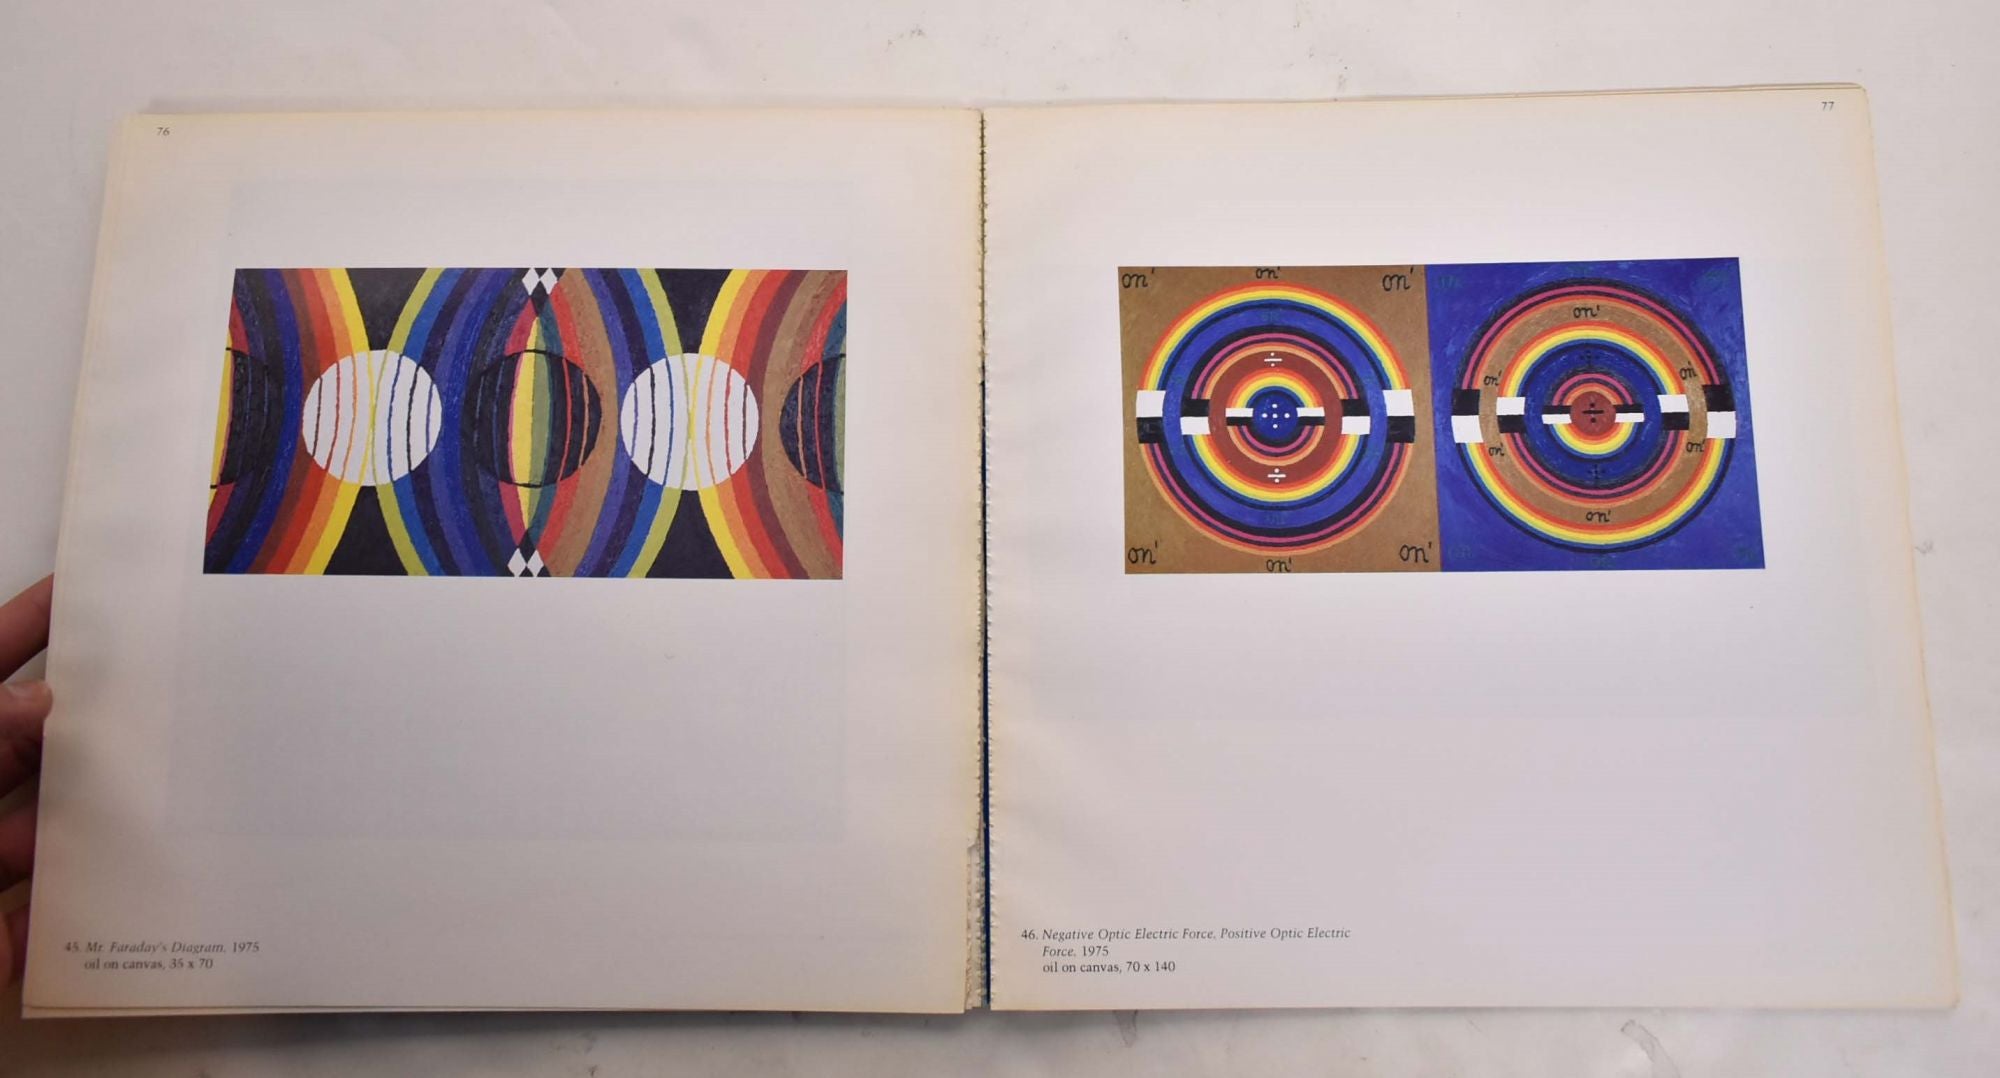 Alfred Jensen: Paintings and Diagrams from the Years 1957-1977 